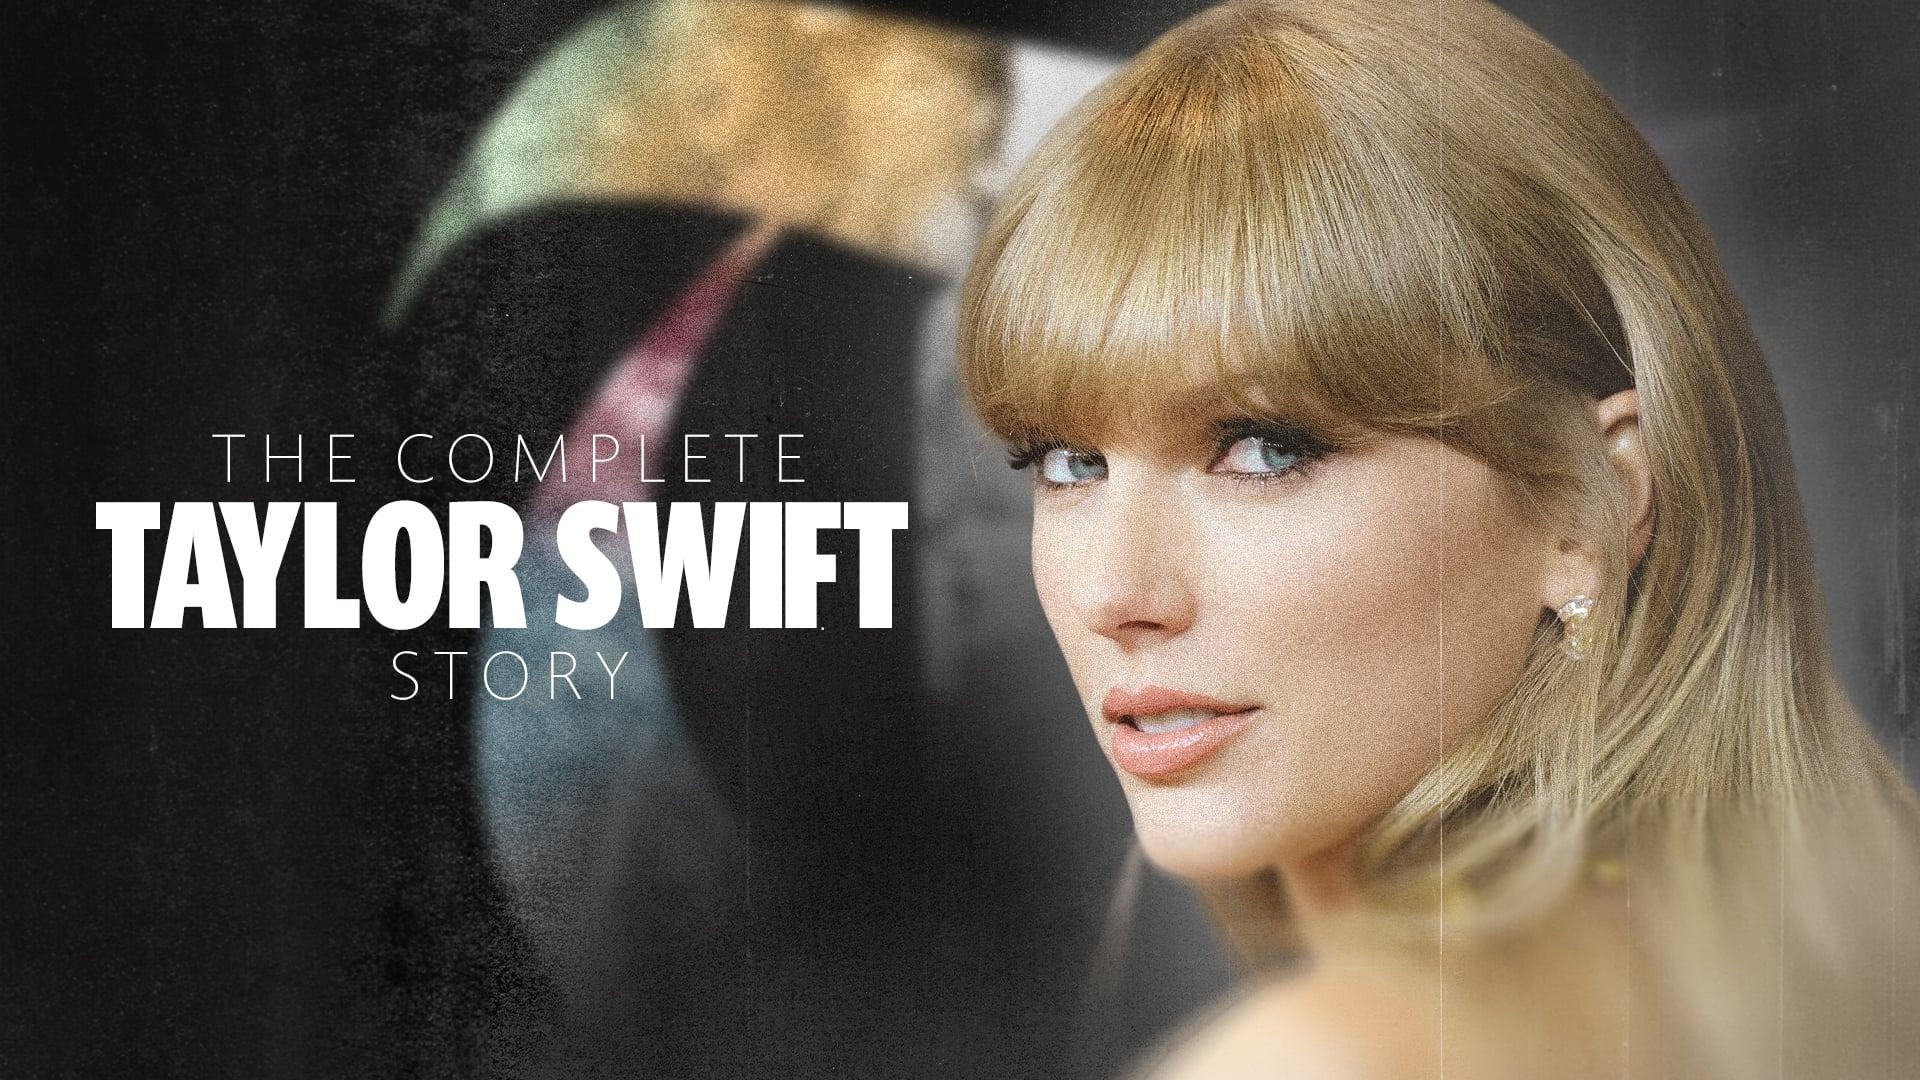 The Complete Taylor Swift Story backdrop